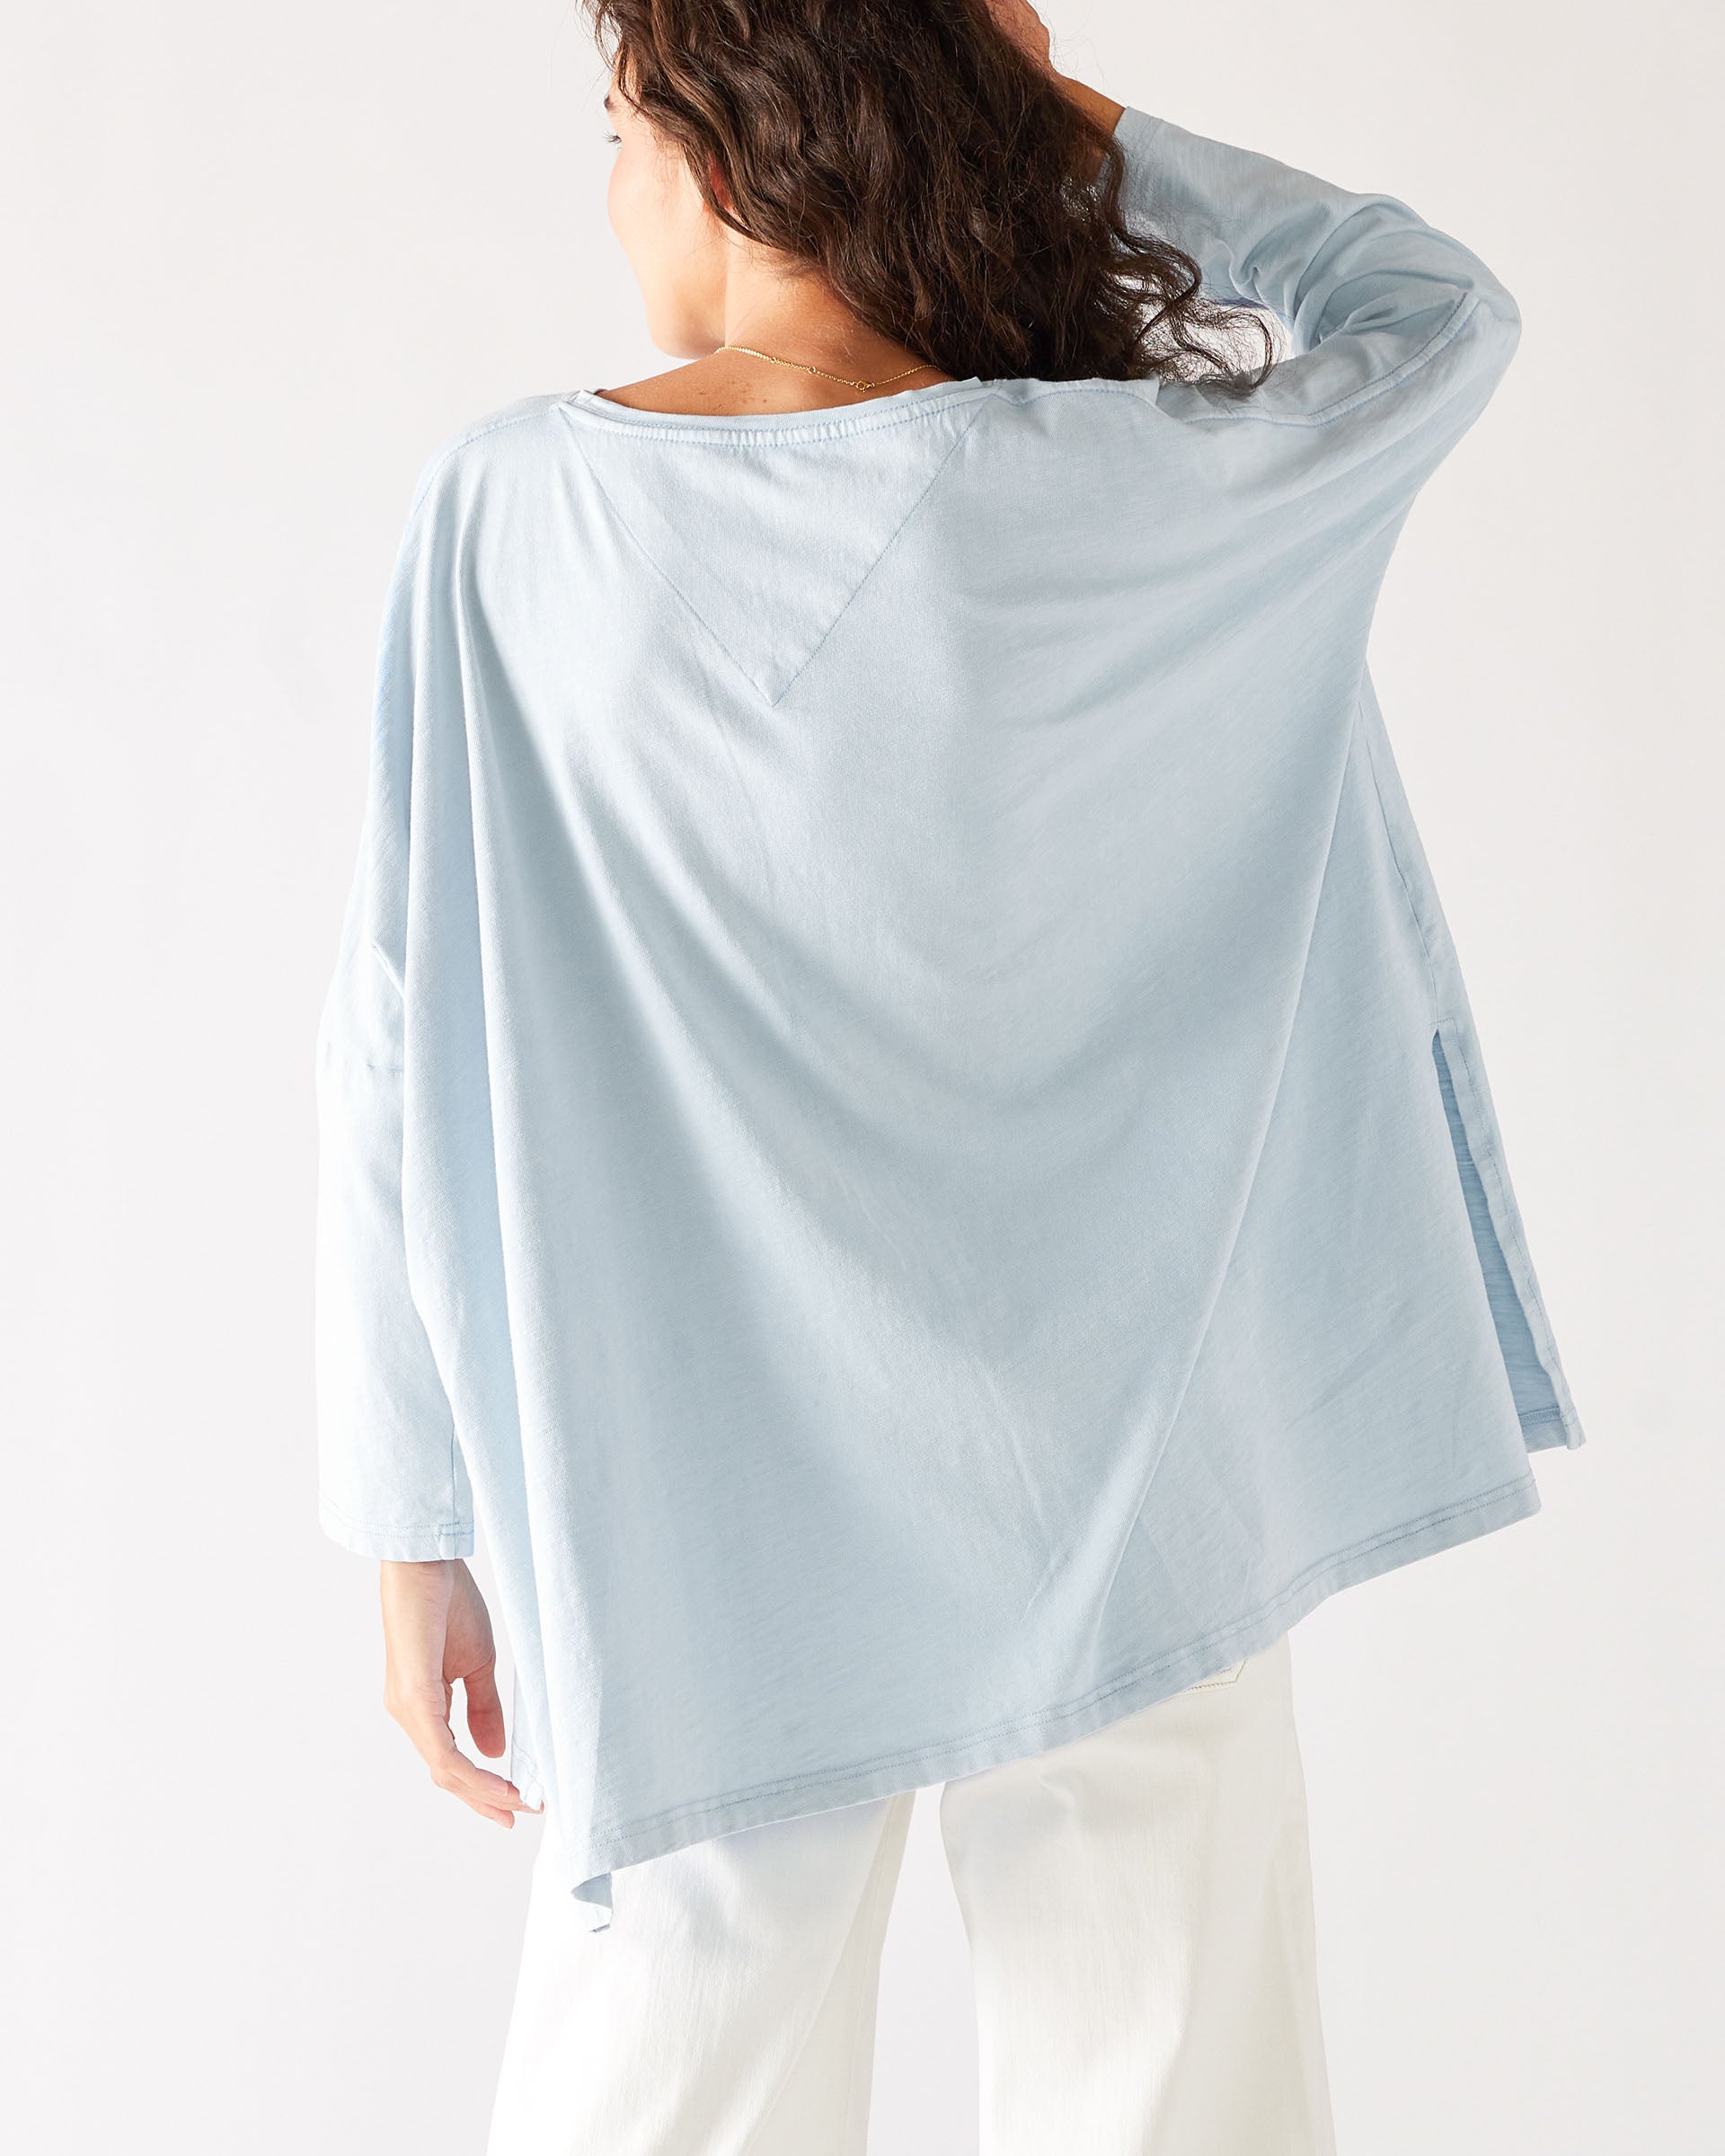 Women's One Size Tee in Light Blue Back View